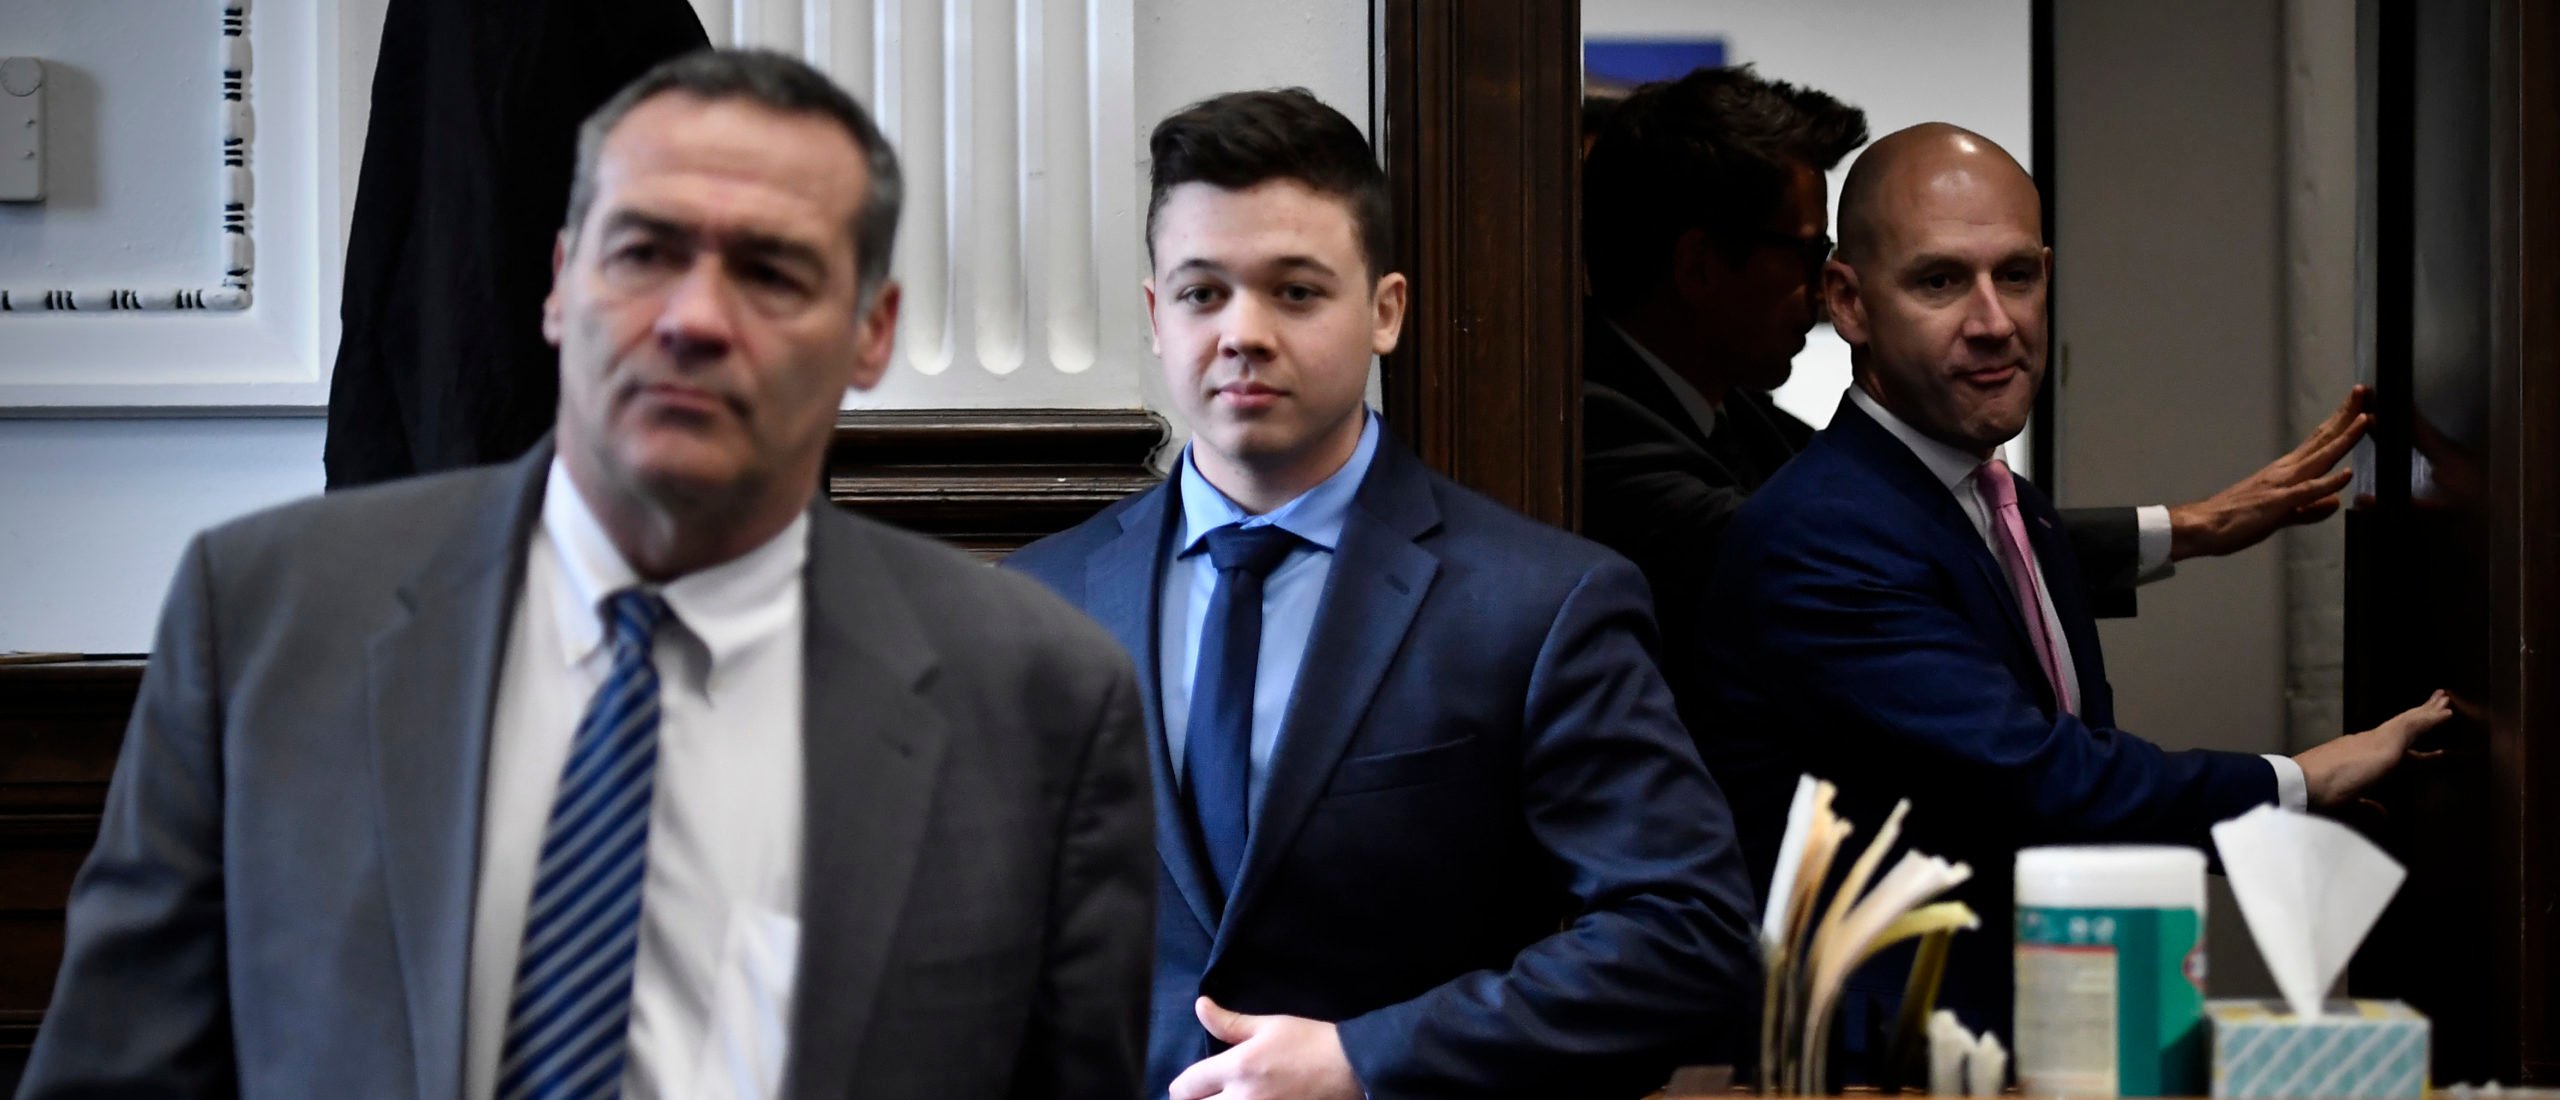 Kyle Rittenhouse, center, enters the courtroom with his attorneys Mark Richards, left, and Corey Chirafisi for a meeting called by Judge Bruce Schroeder at the Kenosha County Courthouse on November 18, 2021 in Kenosha, Wisconsin.(Photo by Sean Krajacic - Pool/Getty Images)